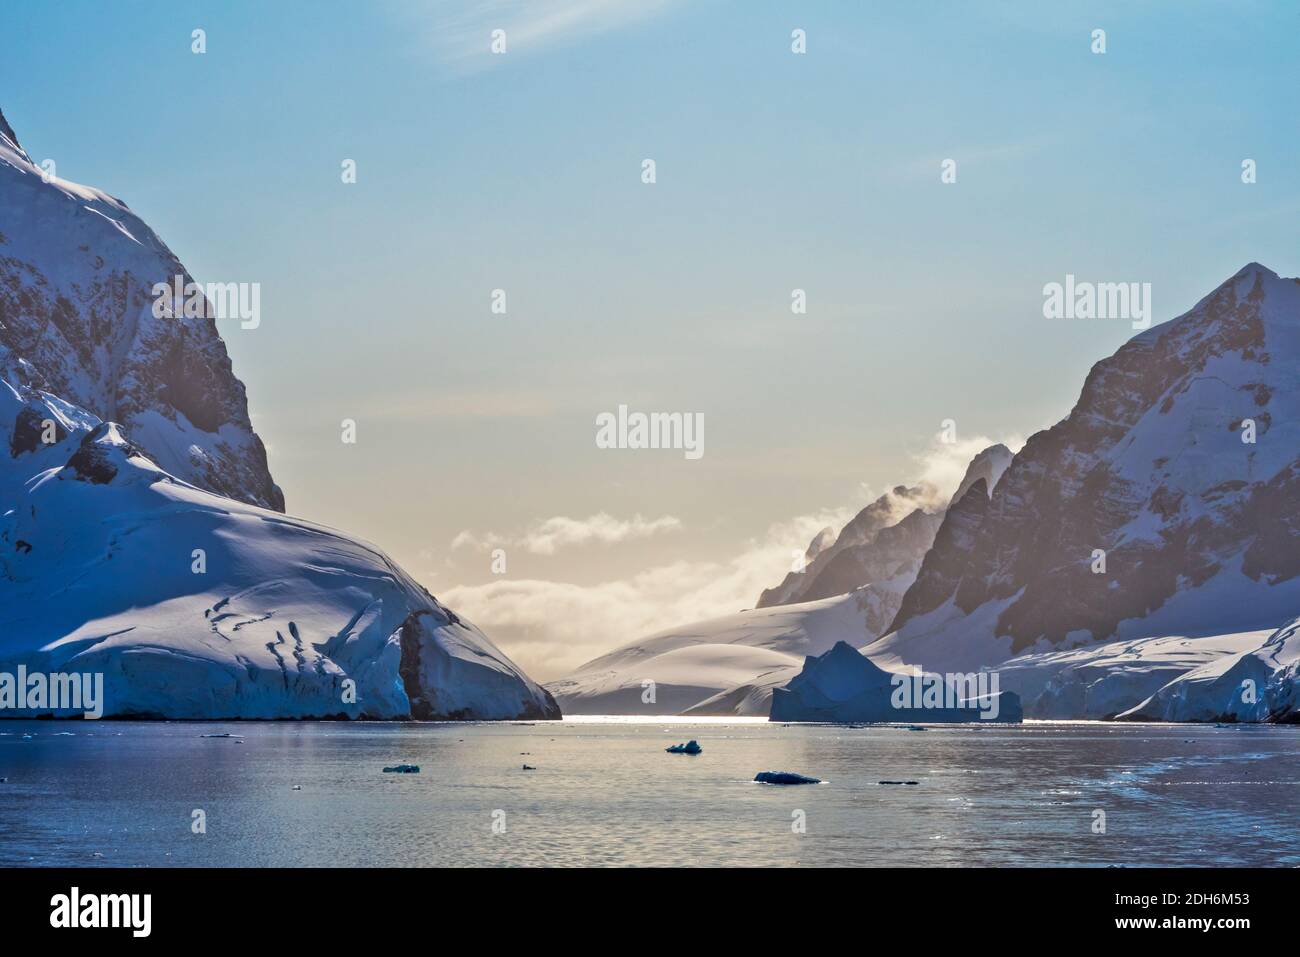 Landscape of snow covered island with iceberg in South Atlantic Ocean, Antarctica Stock Photo